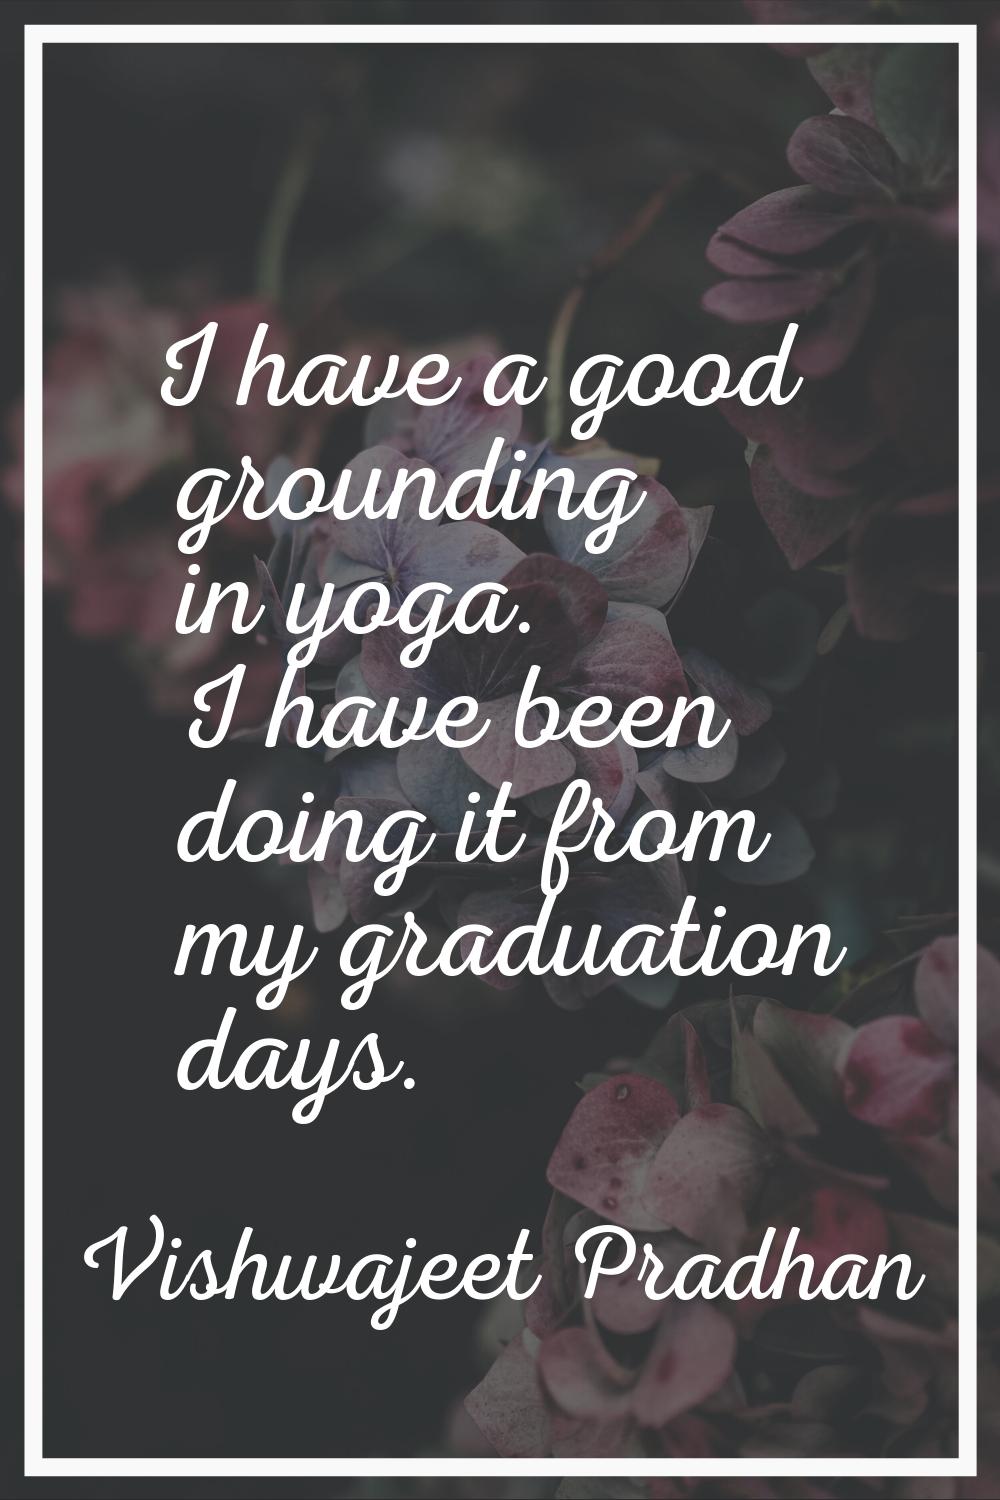 I have a good grounding in yoga. I have been doing it from my graduation days.